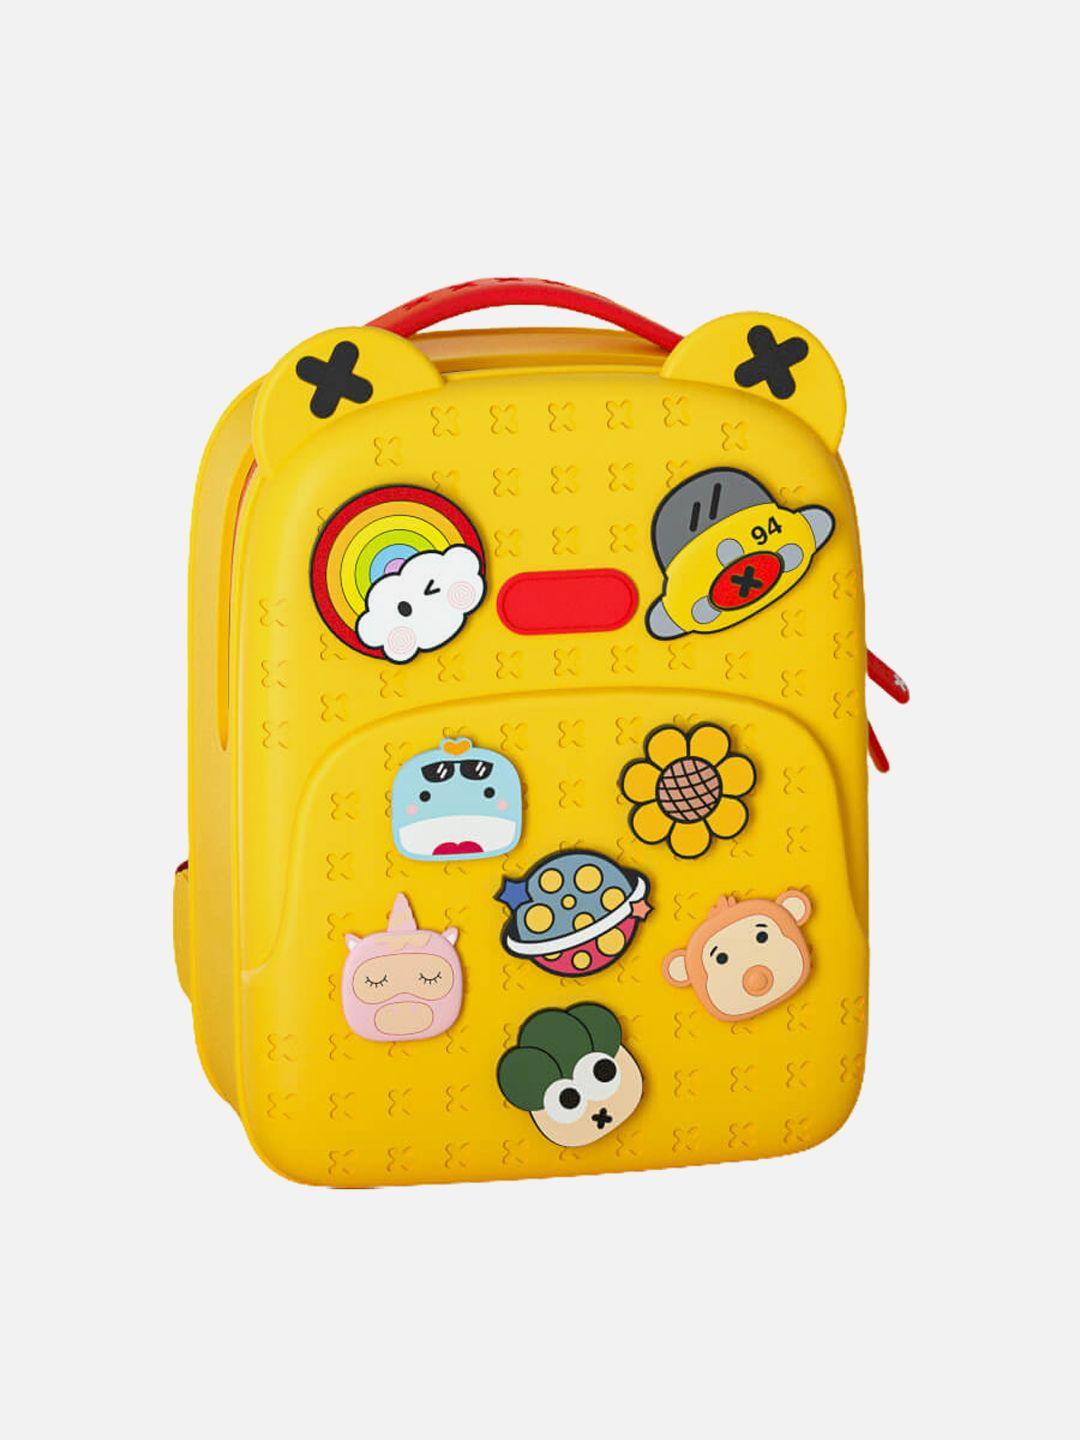 little surprise box llp unisex kids yellow & red backpack